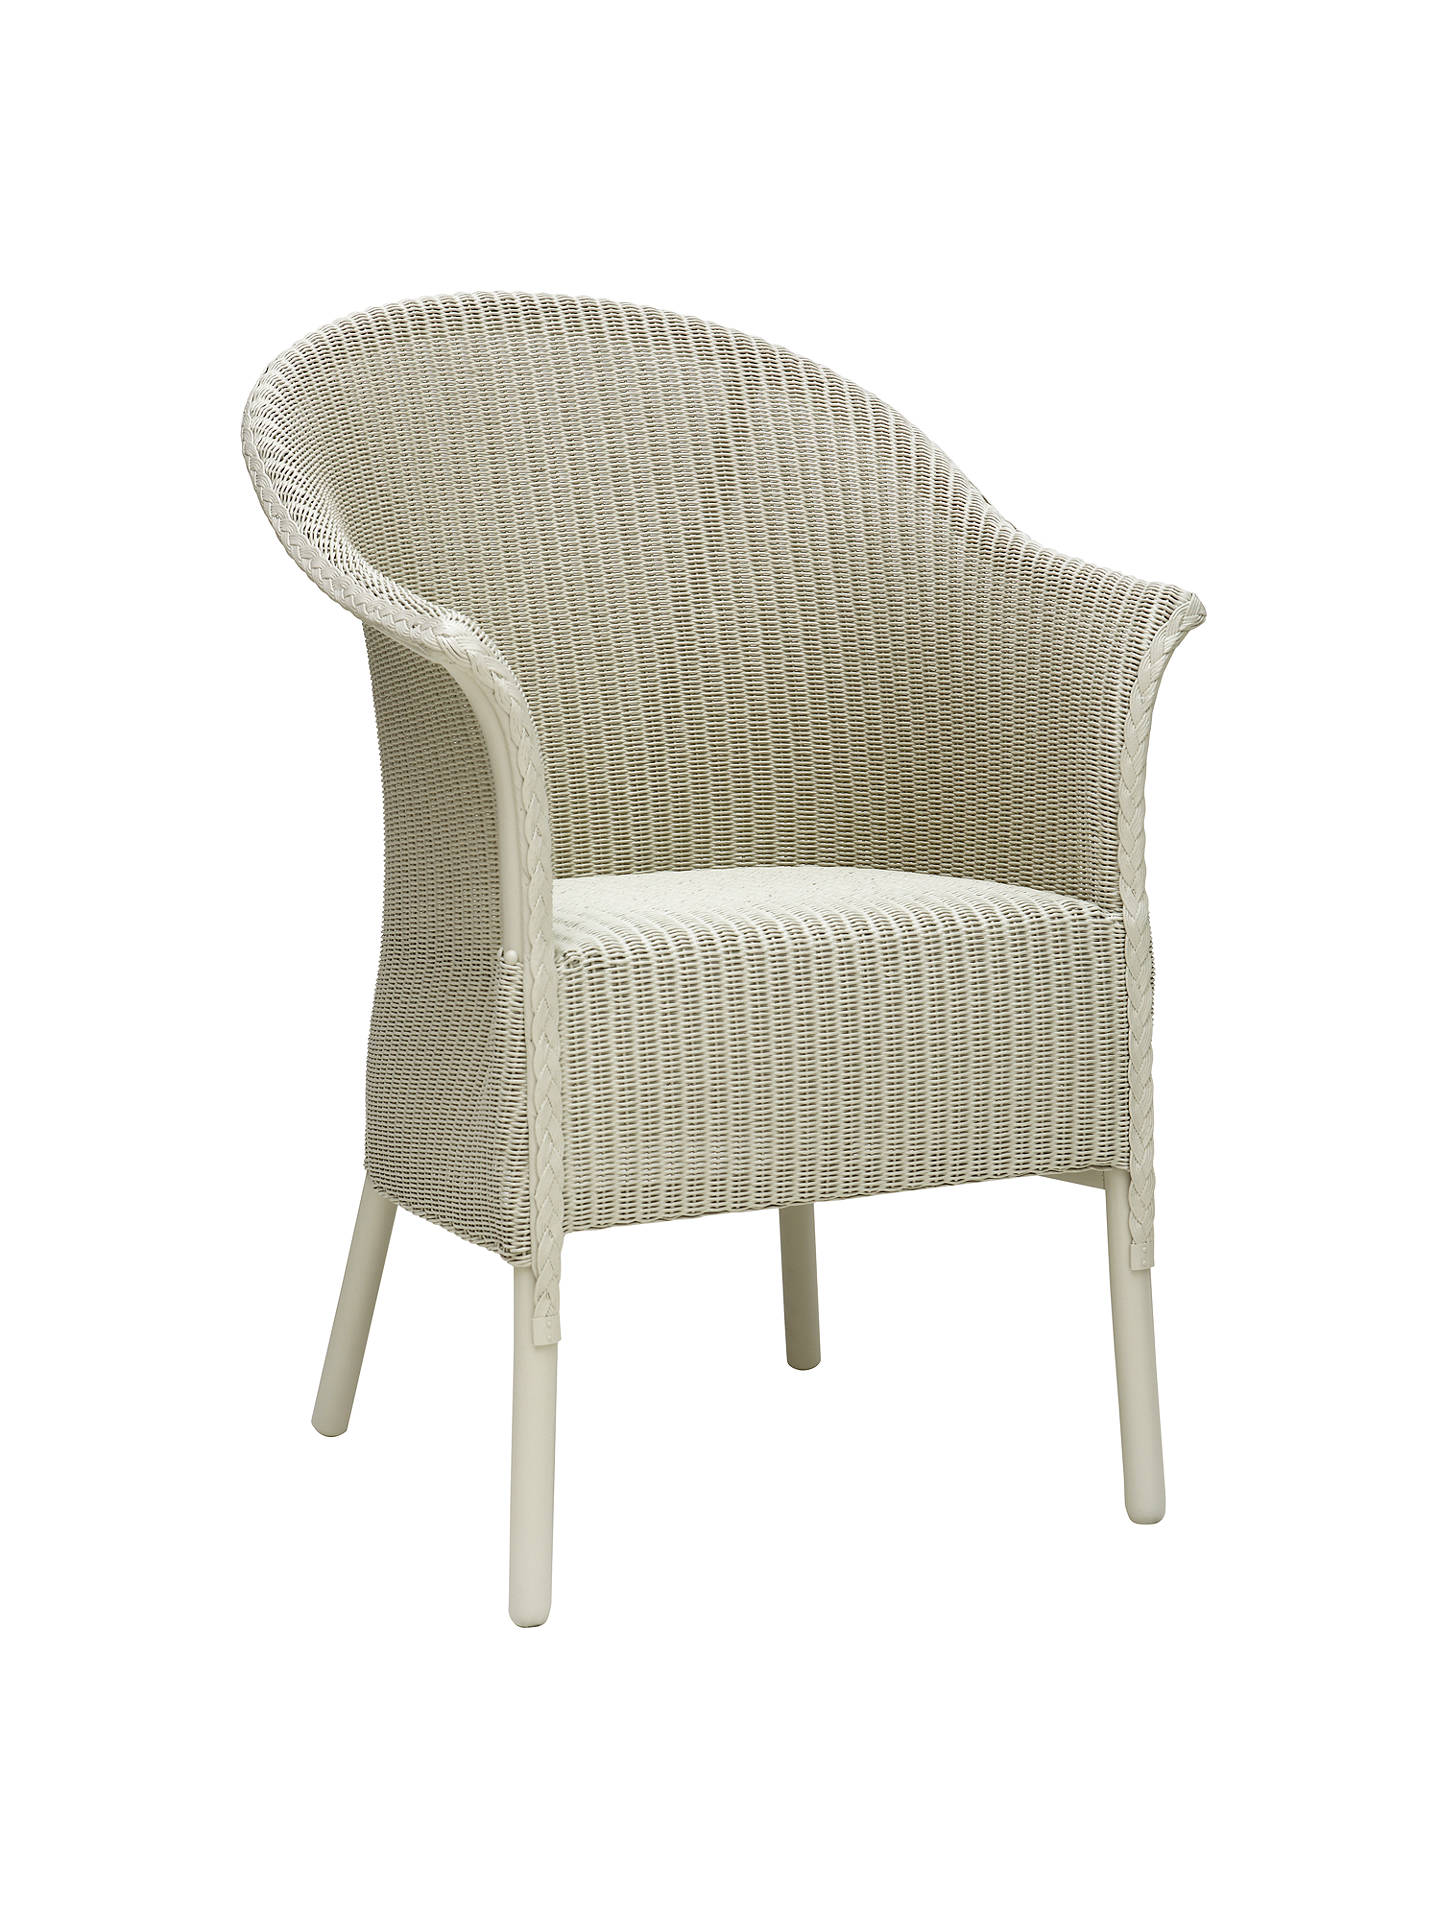 Lloyd Loom Of Spalding Belvoir Chair Nearly White At John Lewis